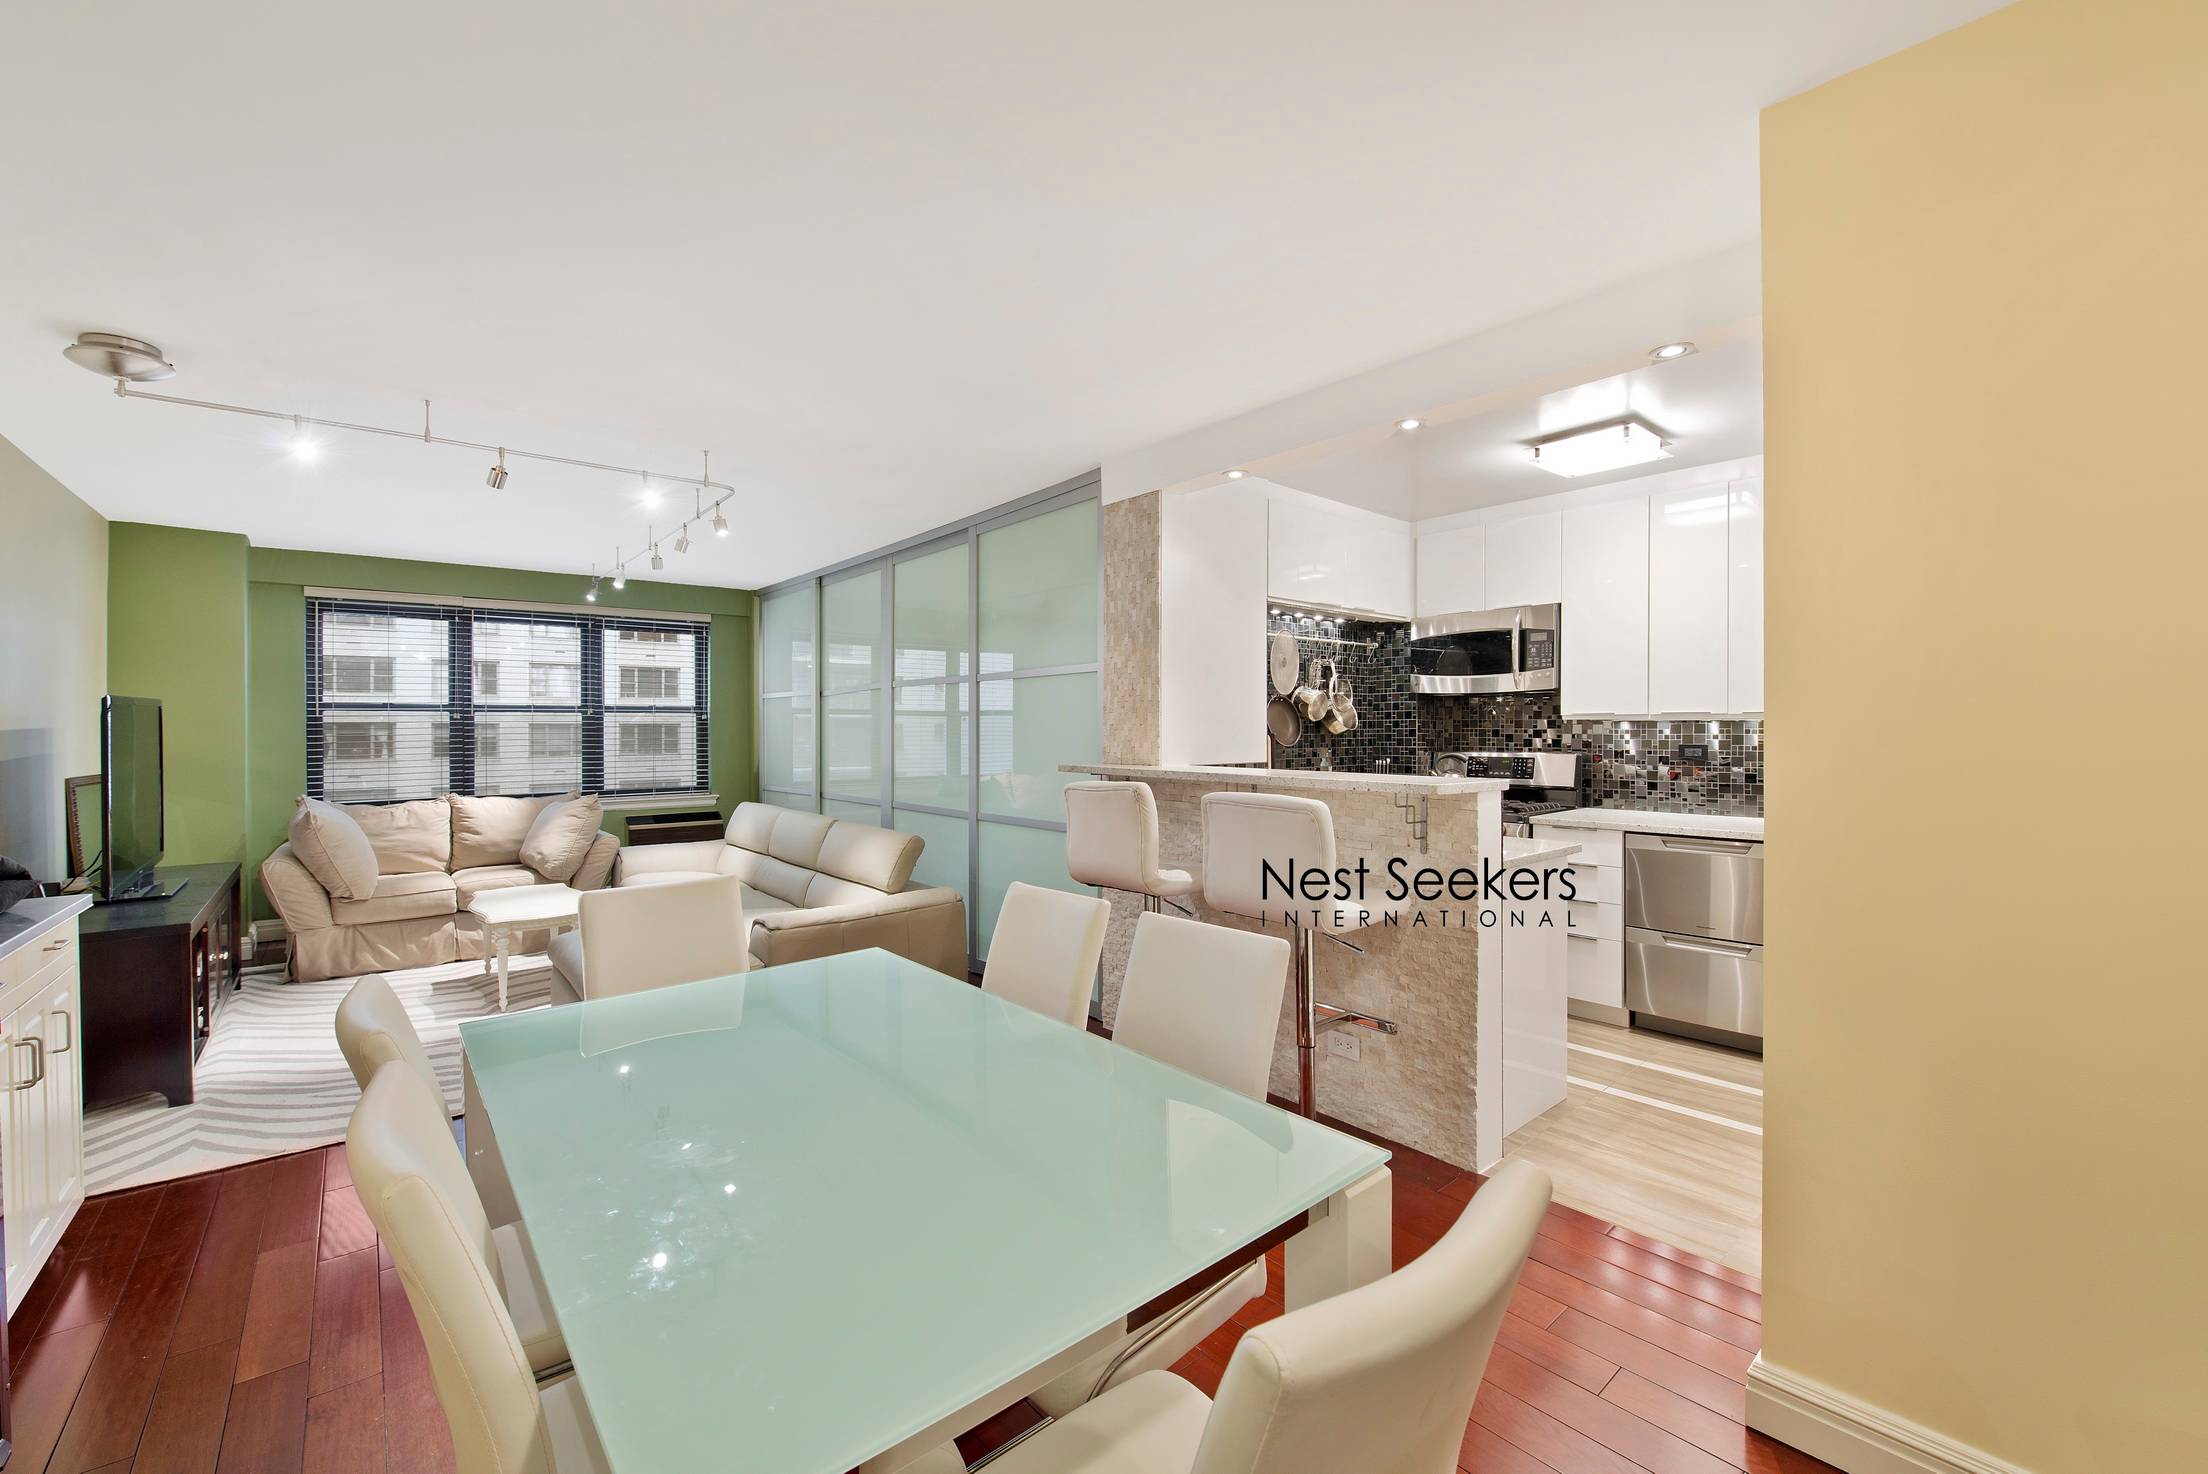 301 East 63 Street, # 5-J  2 Bedrooms,One Year rent Minimum Furnished or Unfurnished NO BROKER FEE